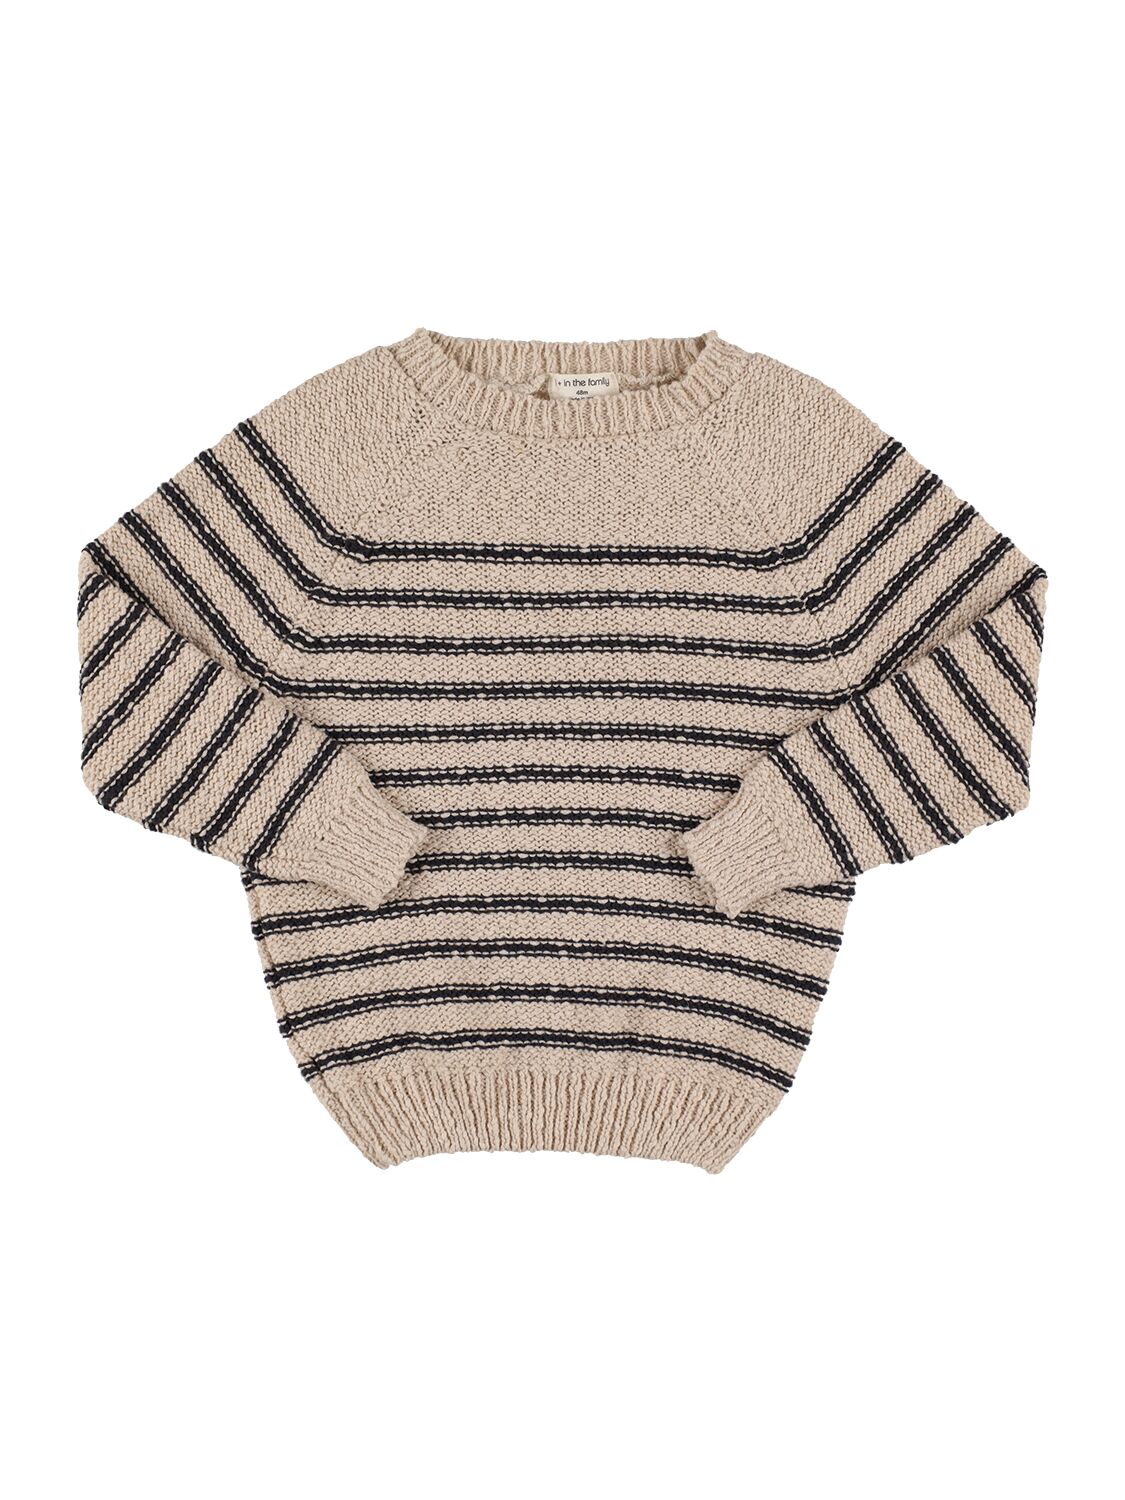 Image of Cotton & Linen Knit Sweater